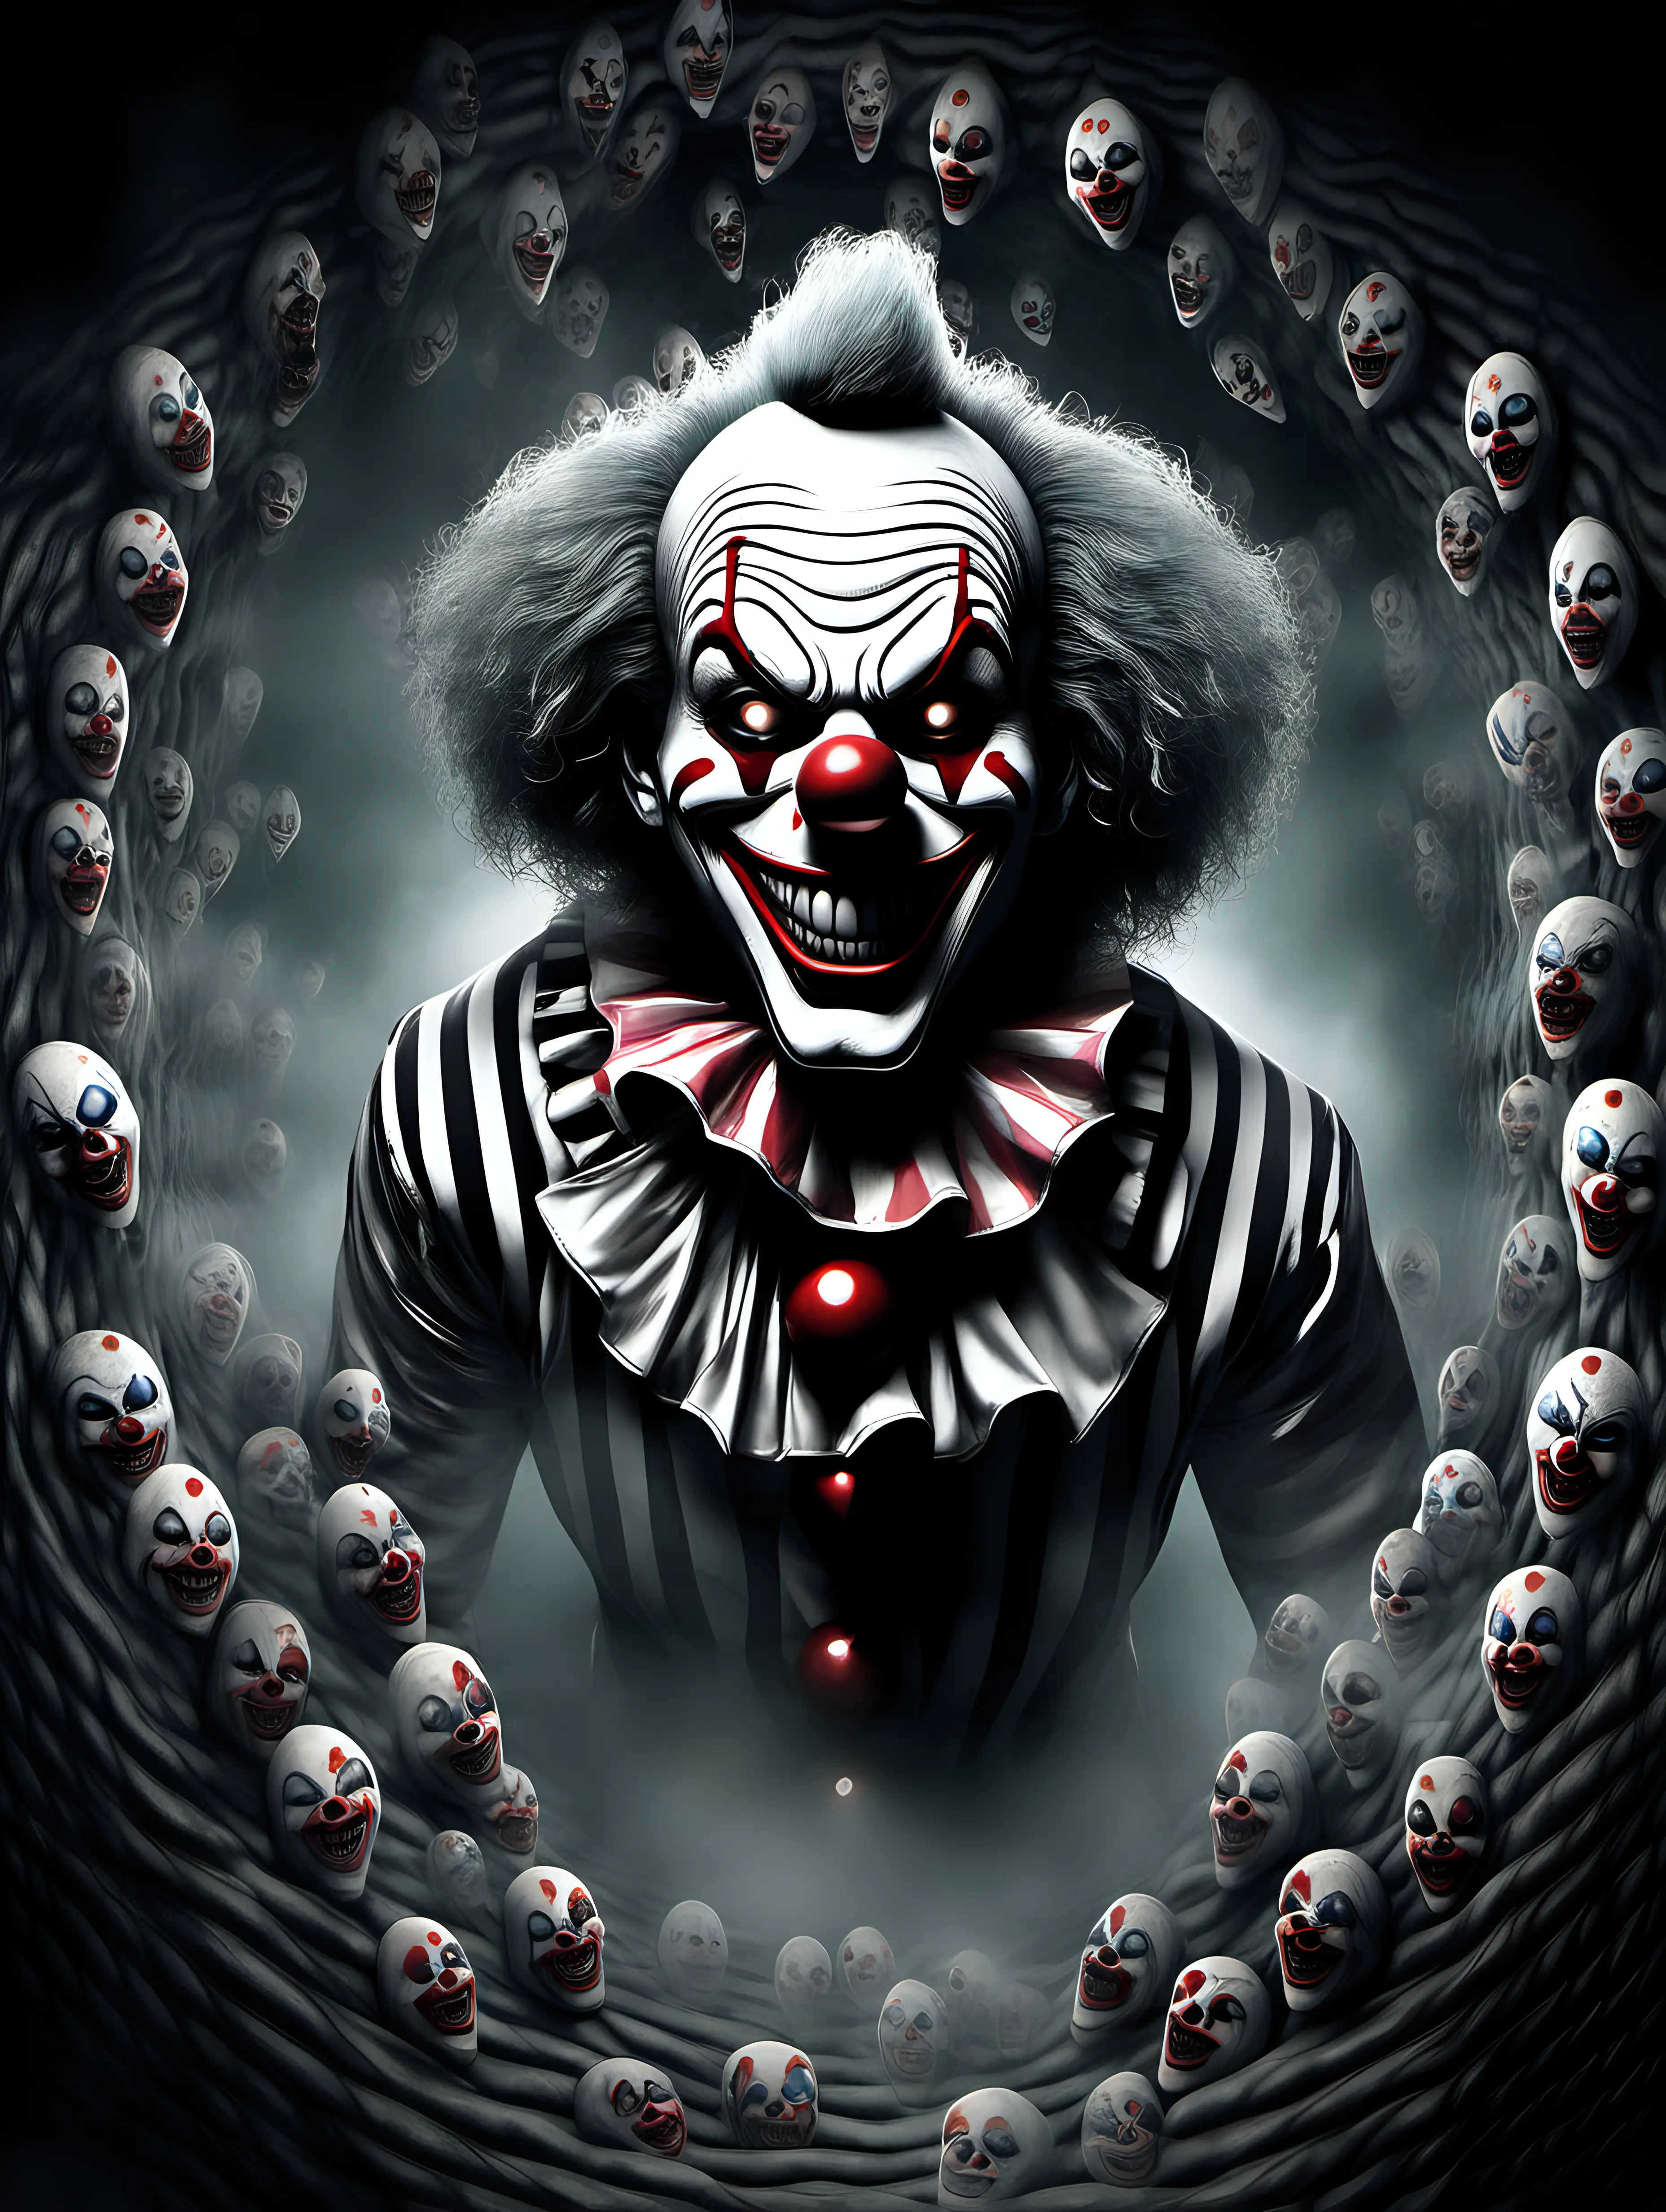 3D Hypnotic Illusion of a Scary Horror Clown